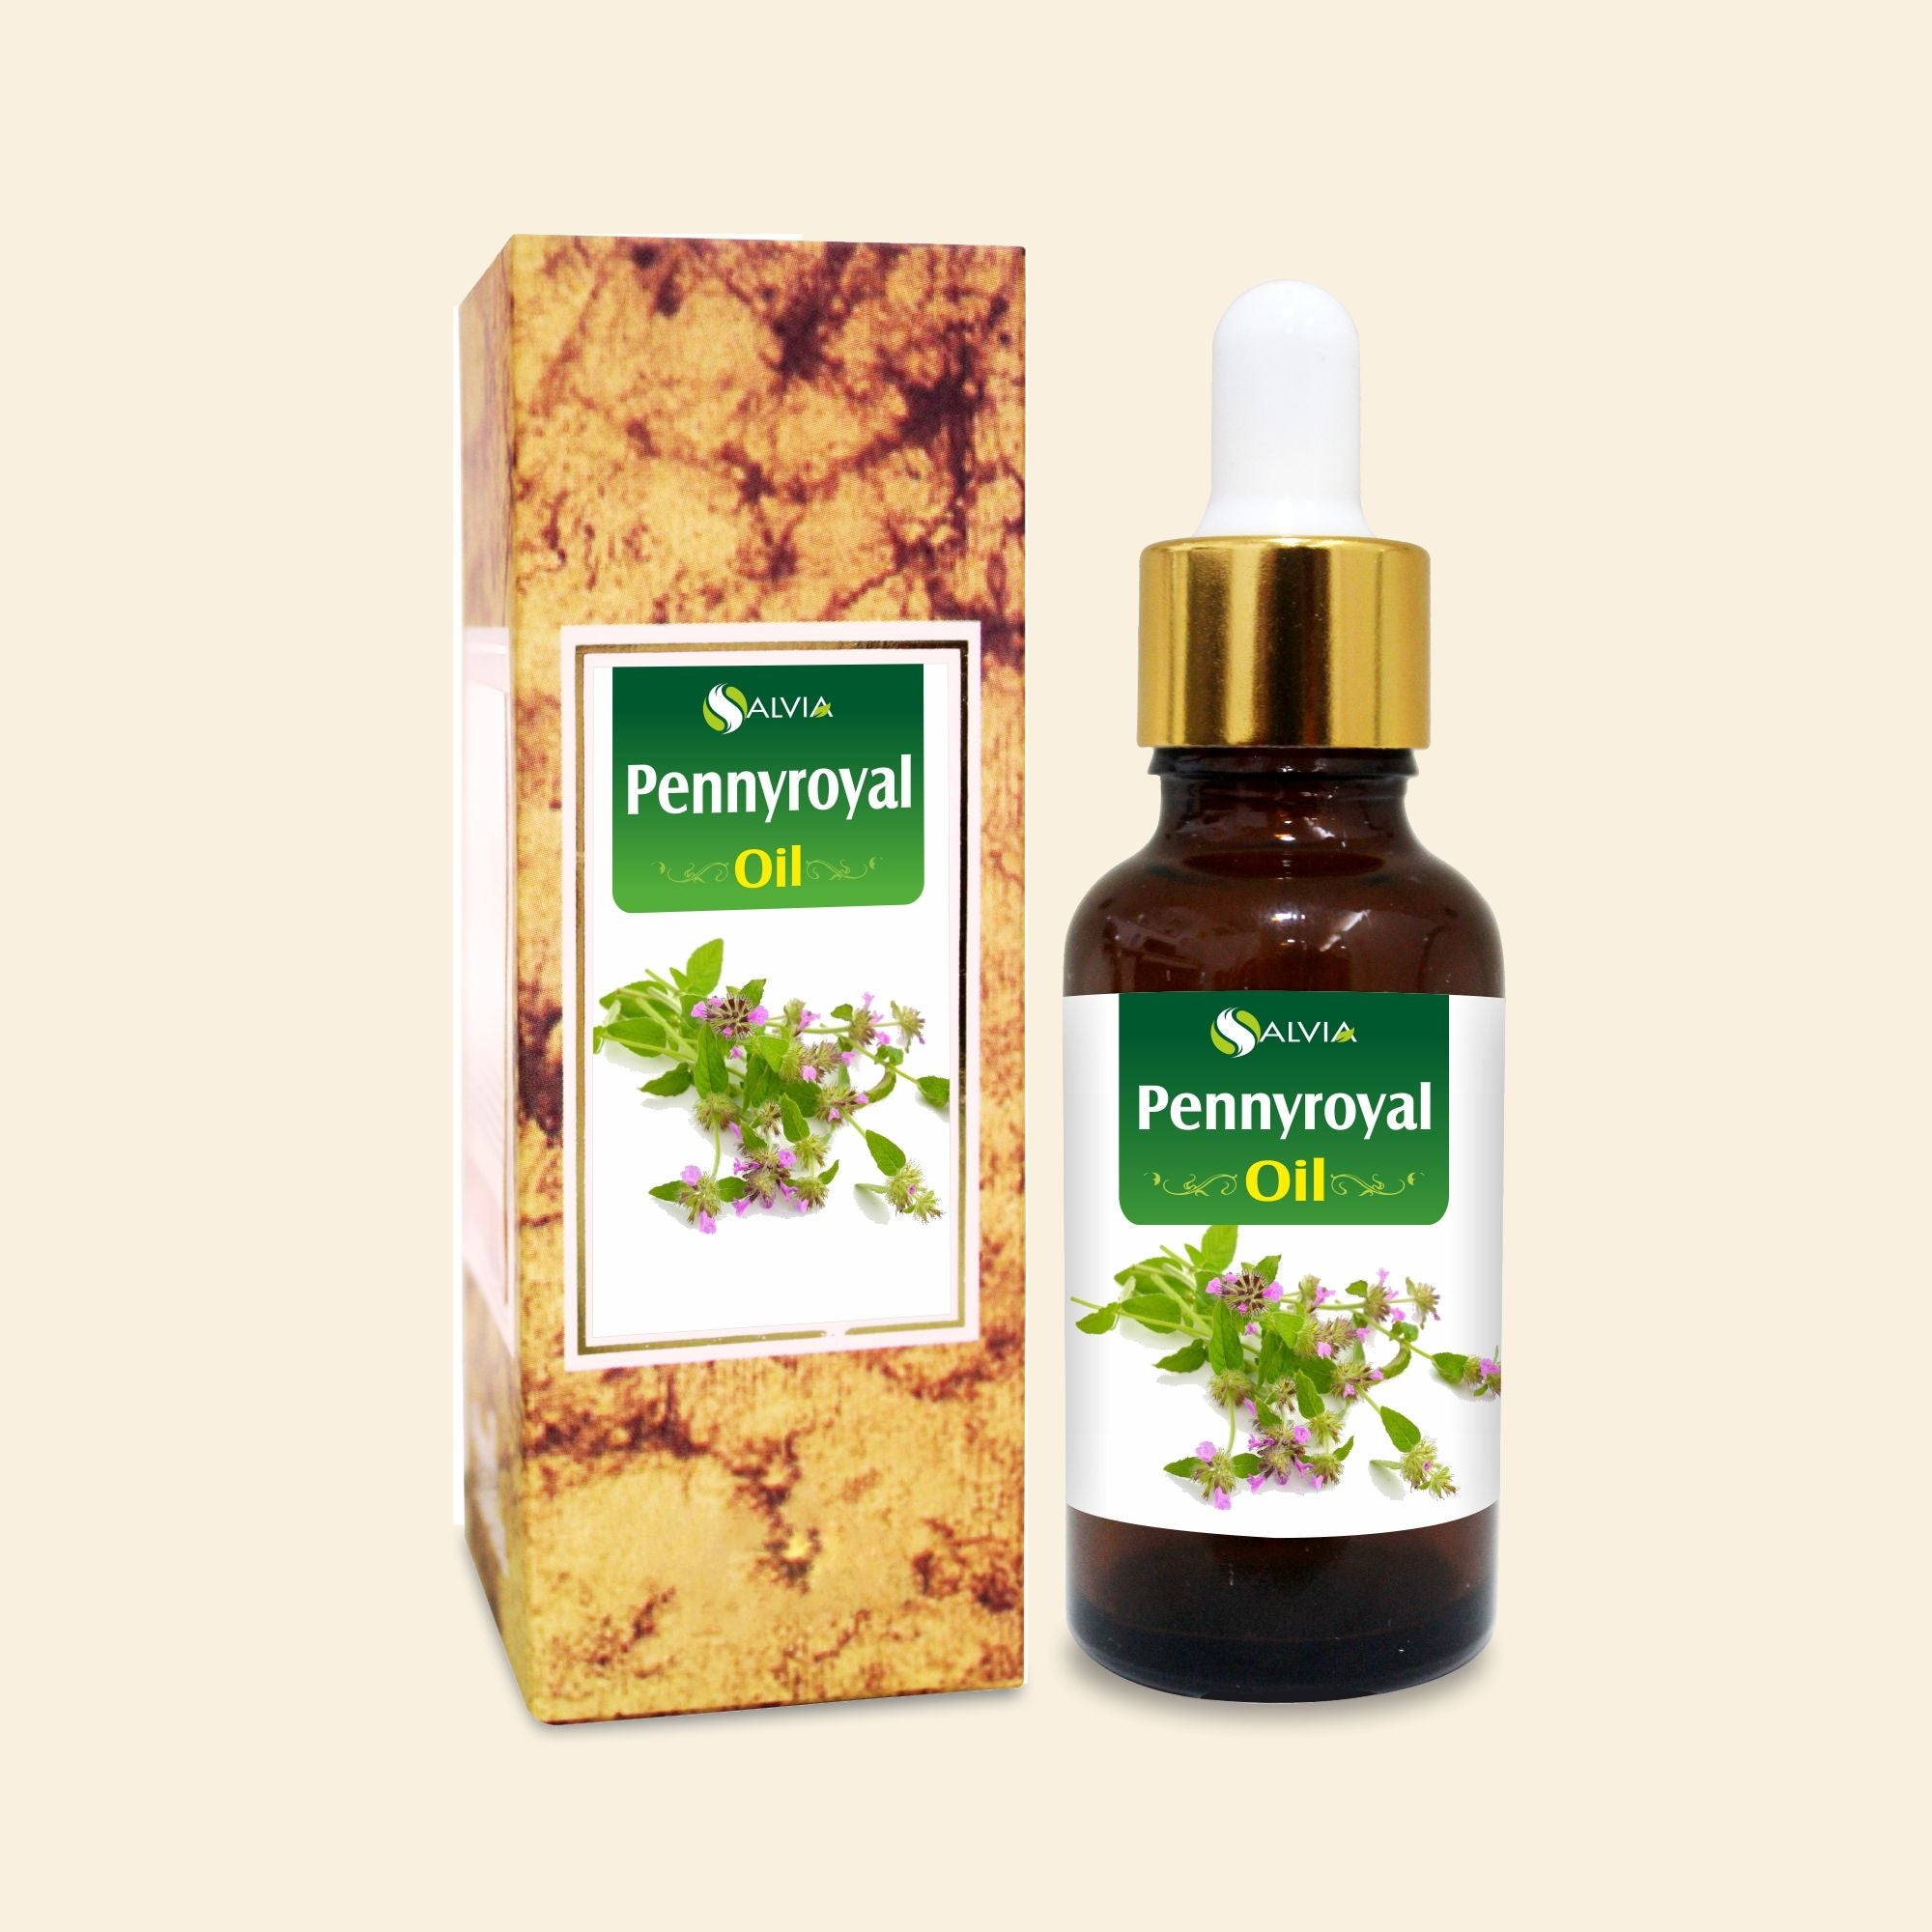 Salvia Natural Essential Oils Pennyroyal Oil (Mentha Pulegium) 100% Natural Pure Essential Oil Fights Germs, Soothes Skin Conditions, Insect Repellent